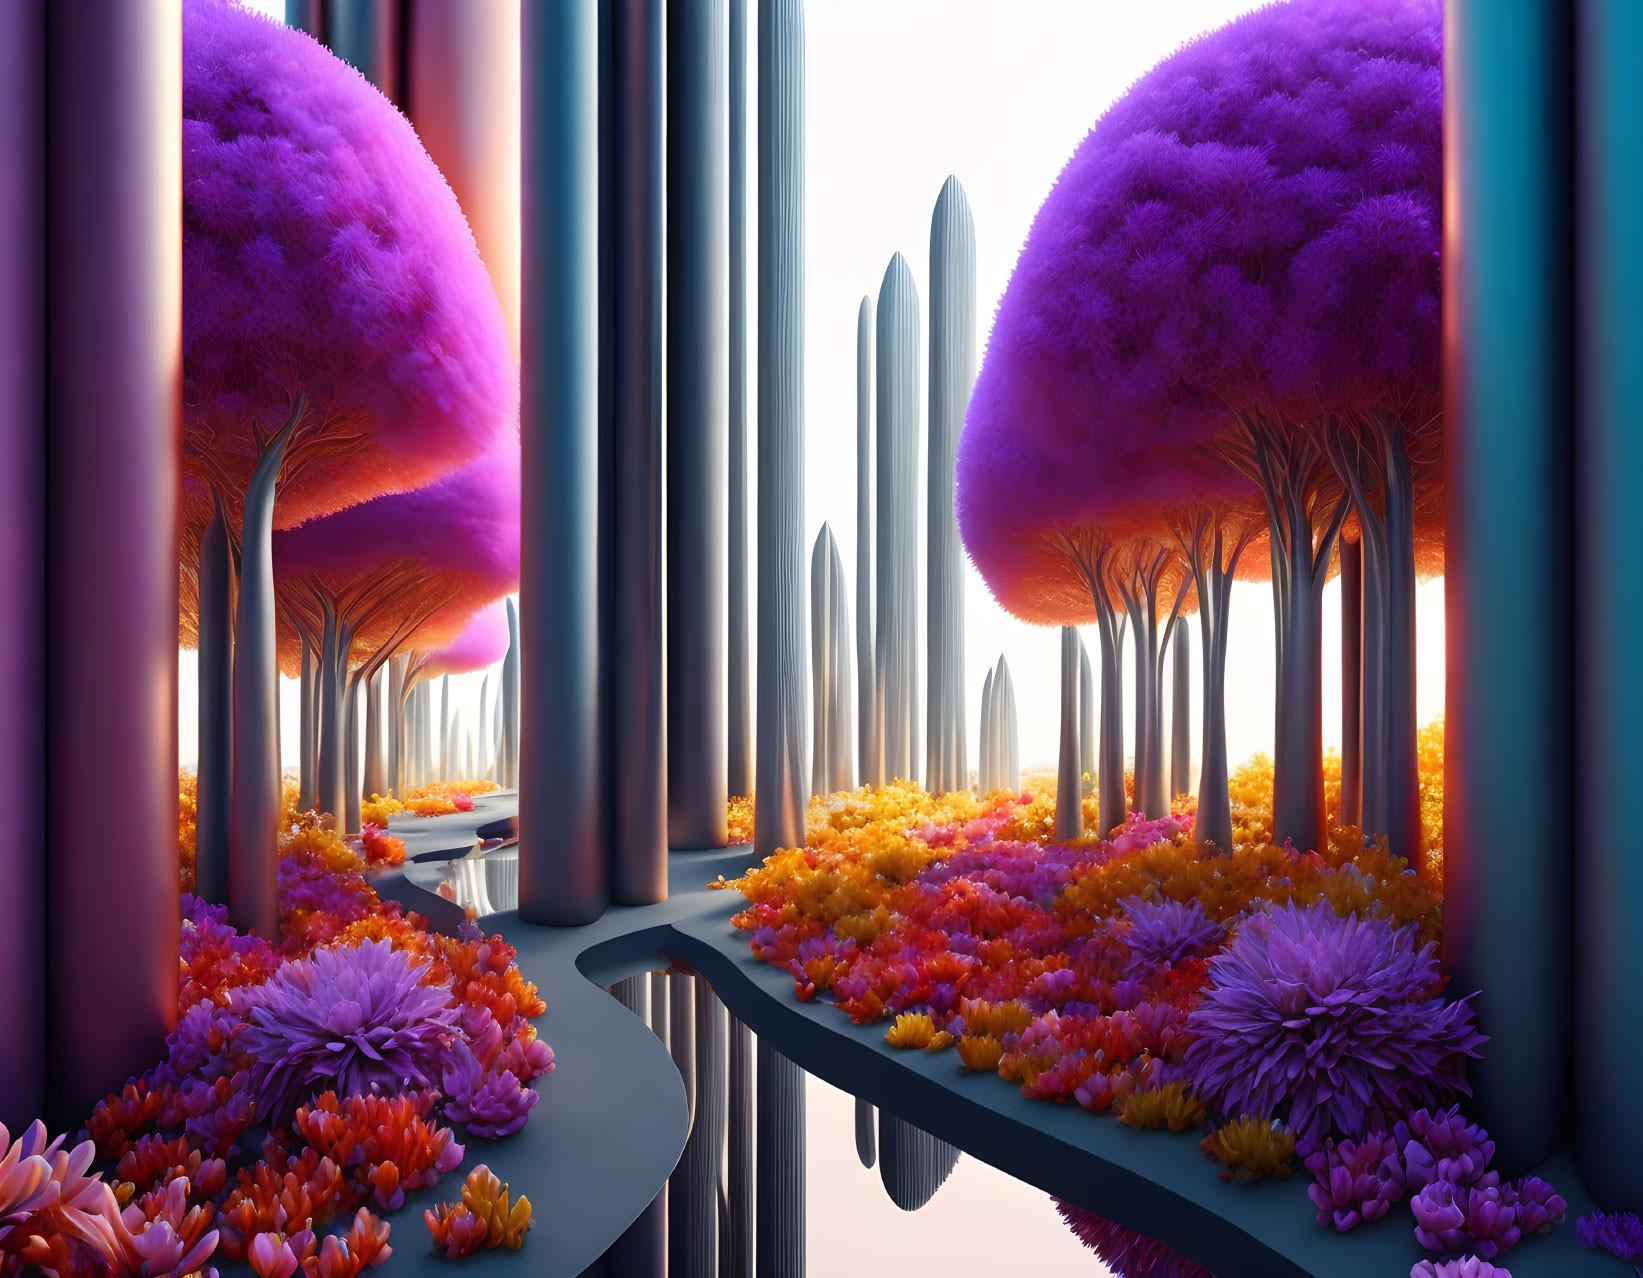 Colorful Fantasy Landscape with Purple Trees and Glossy Pillars